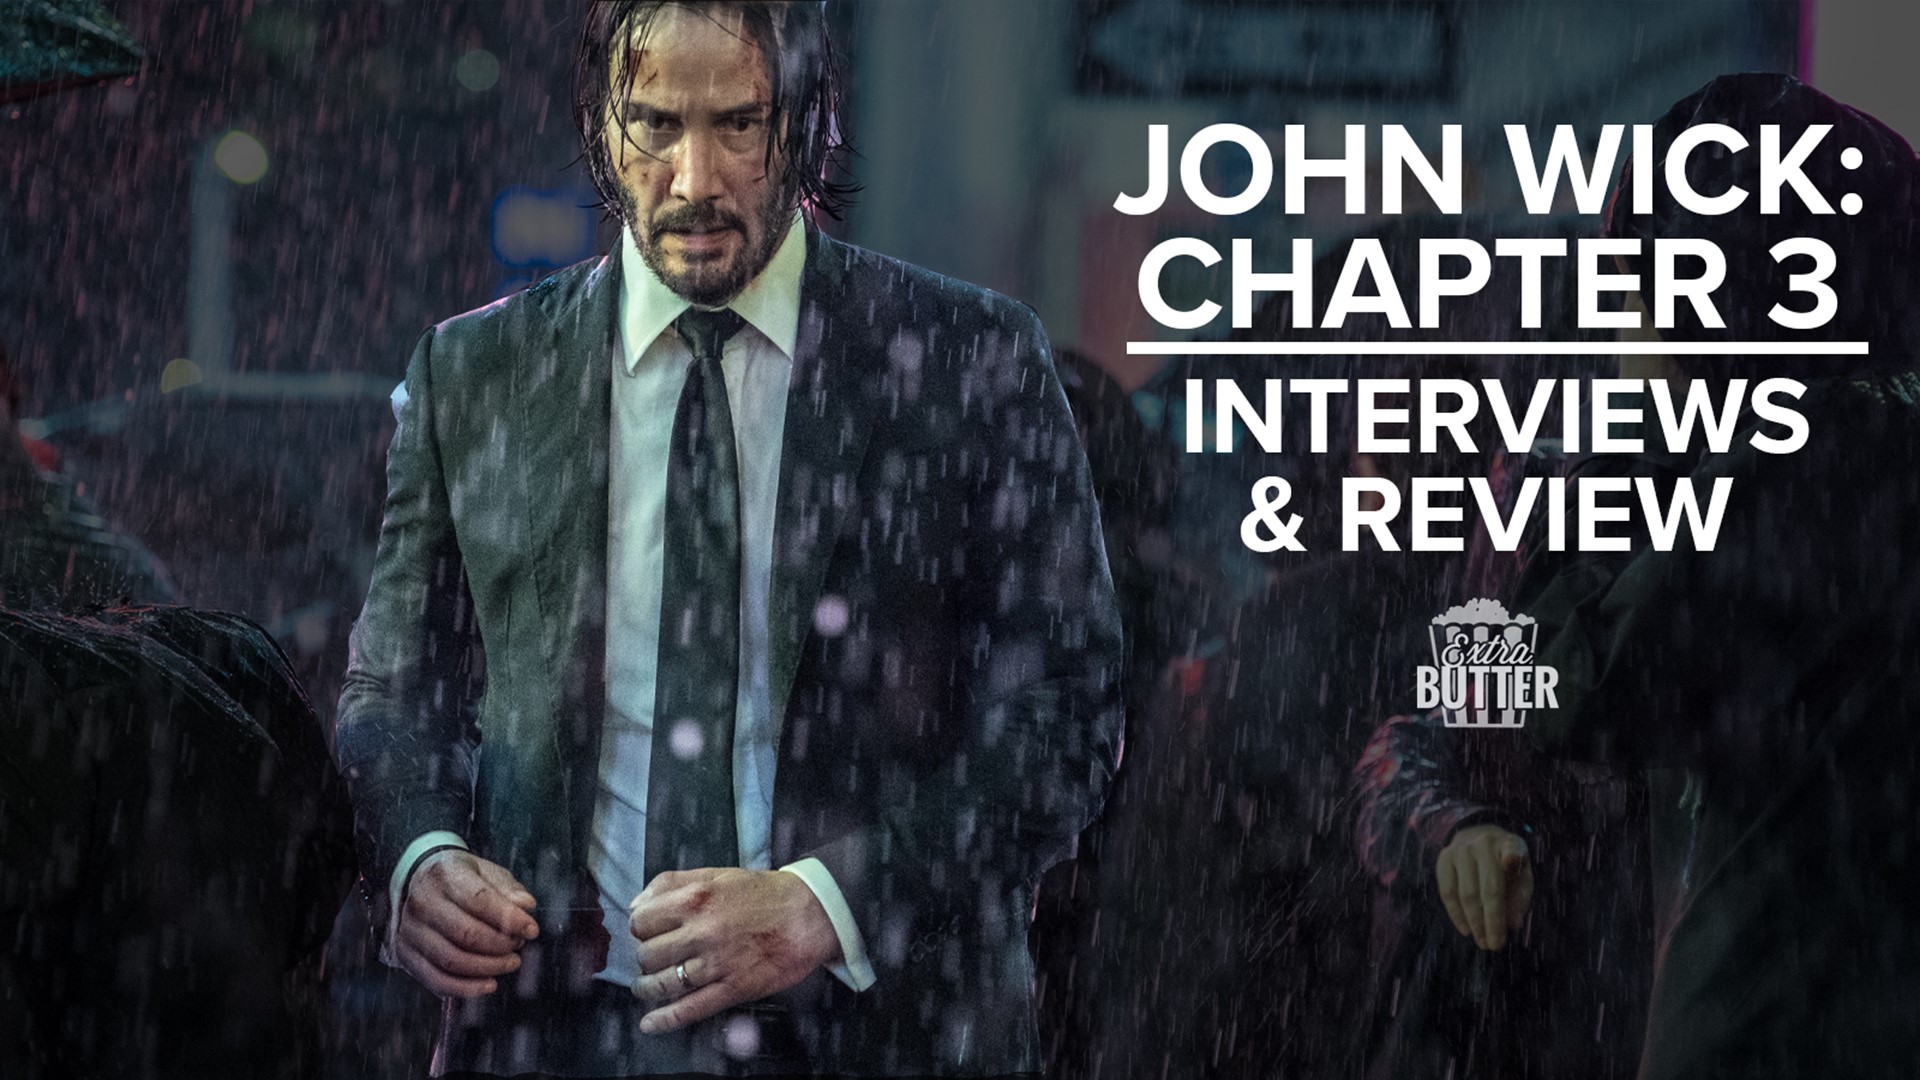 Keanu Reeves is back for more action in 'John Wick: Chapter 3 – Parabellum.' The latest movie in the series adds Halle Berry, who talks with Julian Soto.